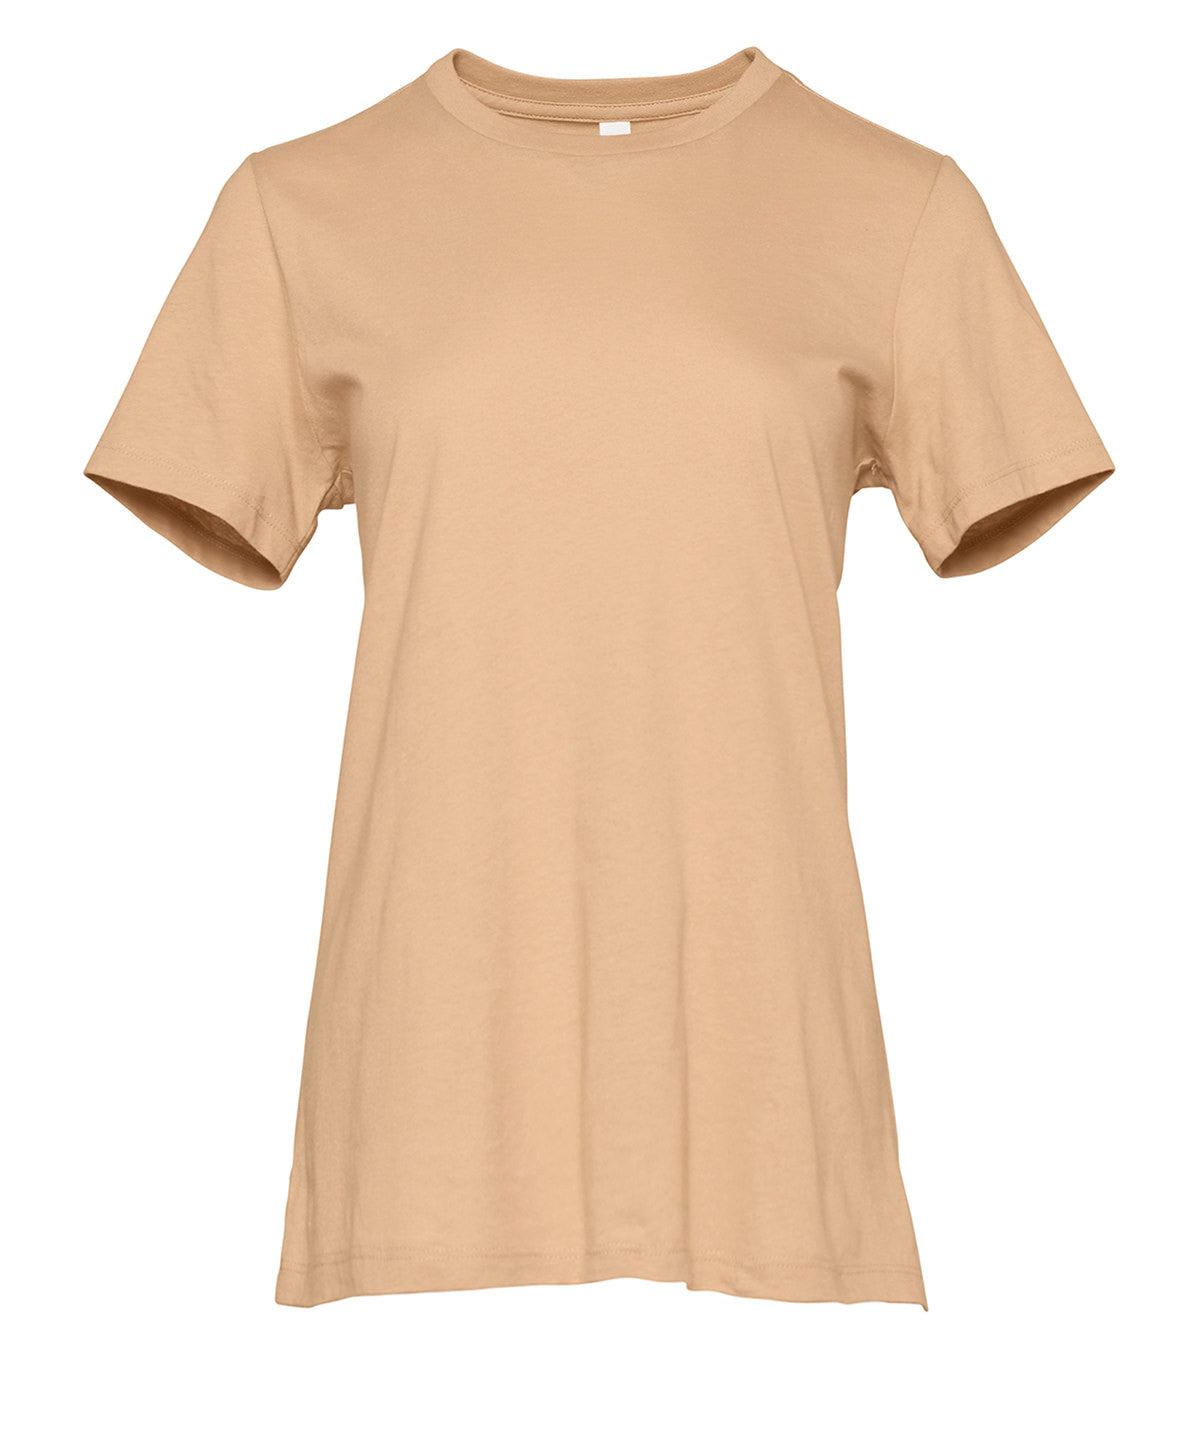 Personalised T-Shirts - Gold Bella Canvas Women's relaxed Jersey short sleeve tee